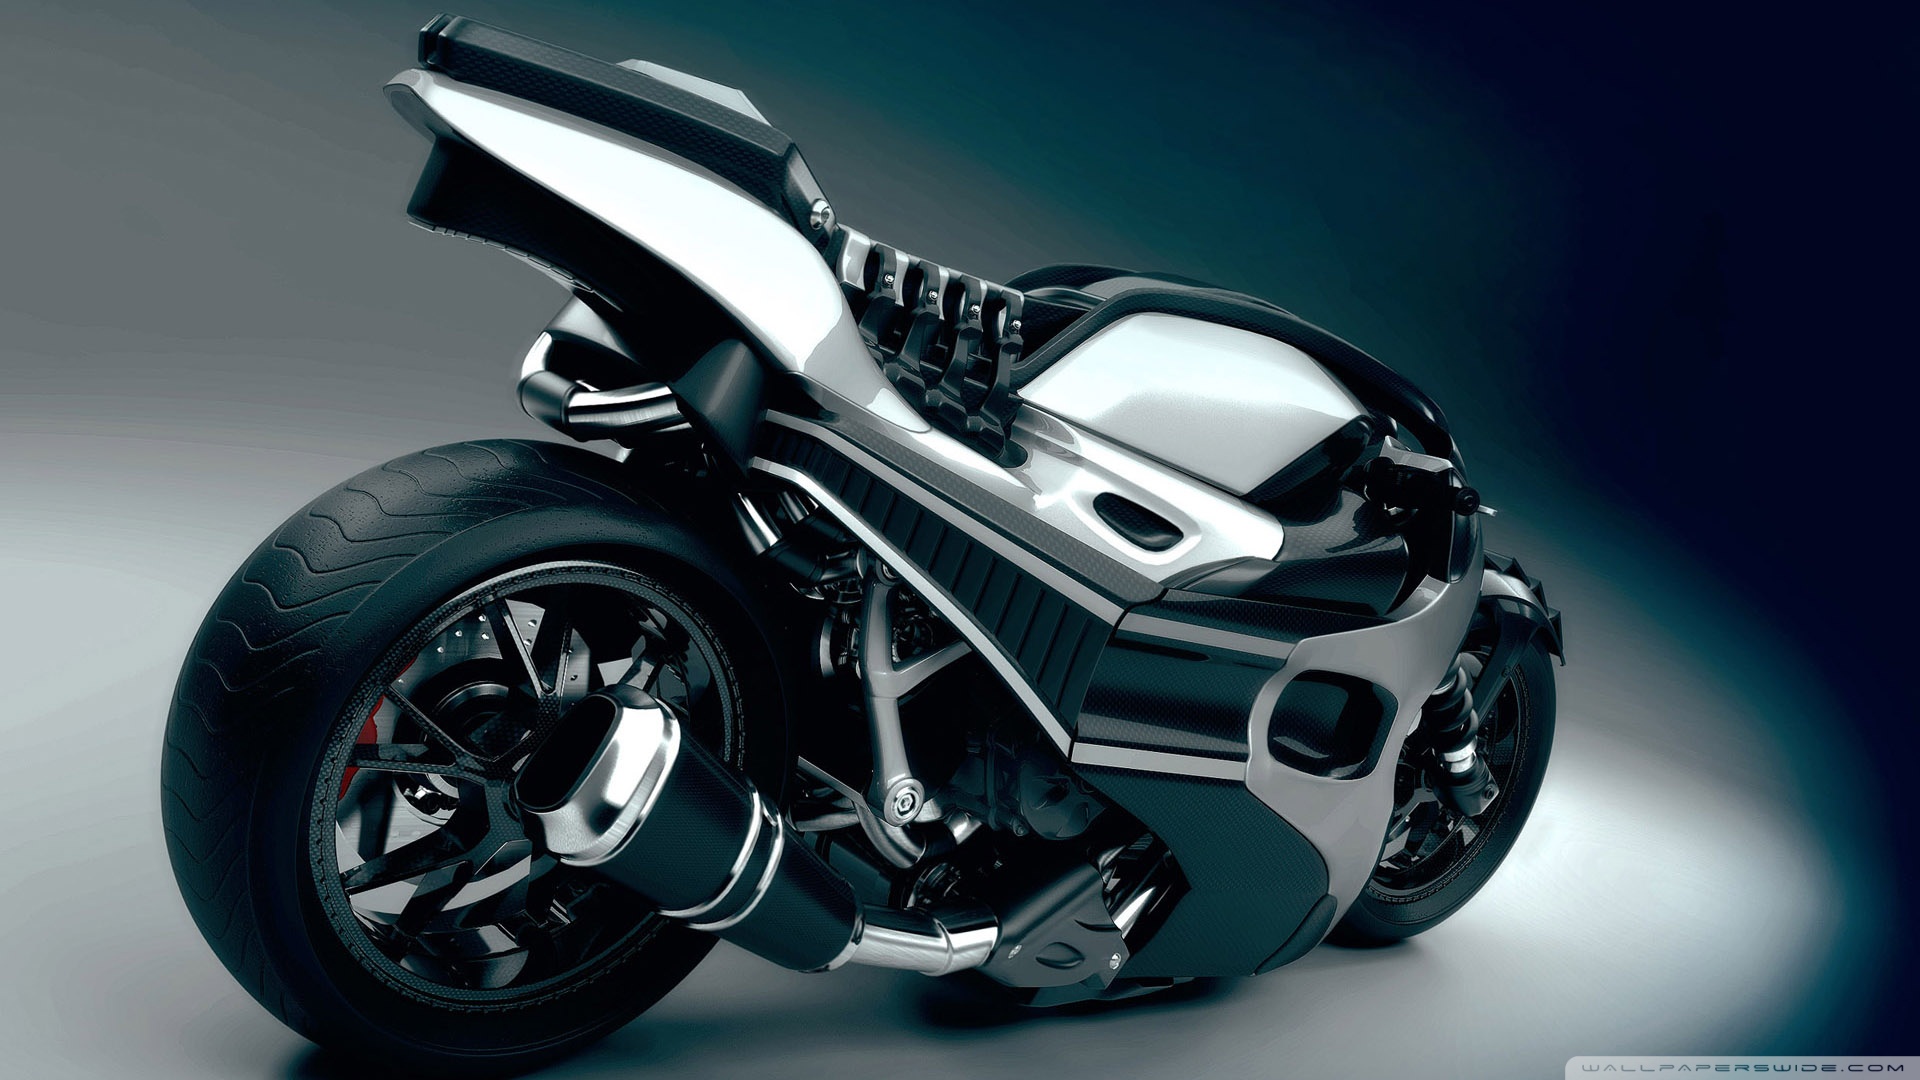 3d wallpaper of cars and bikes,land vehicle,vehicle,motorcycle,automotive design,car